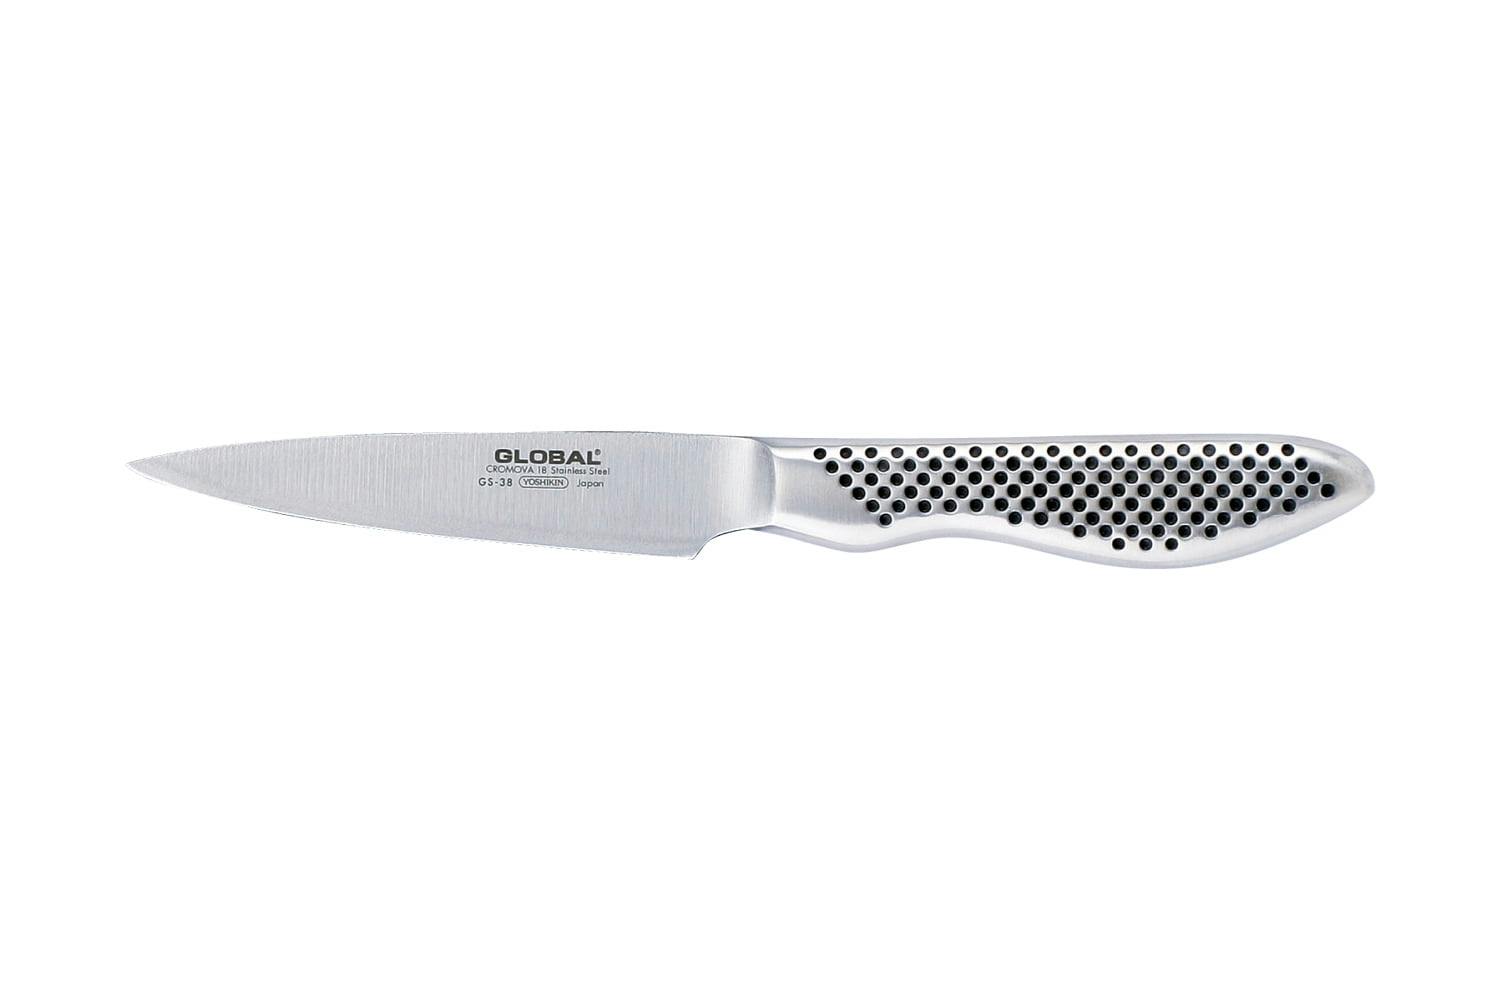 3.5" Stainless Steel Global Paring Knife with Slip-Resistant Grip